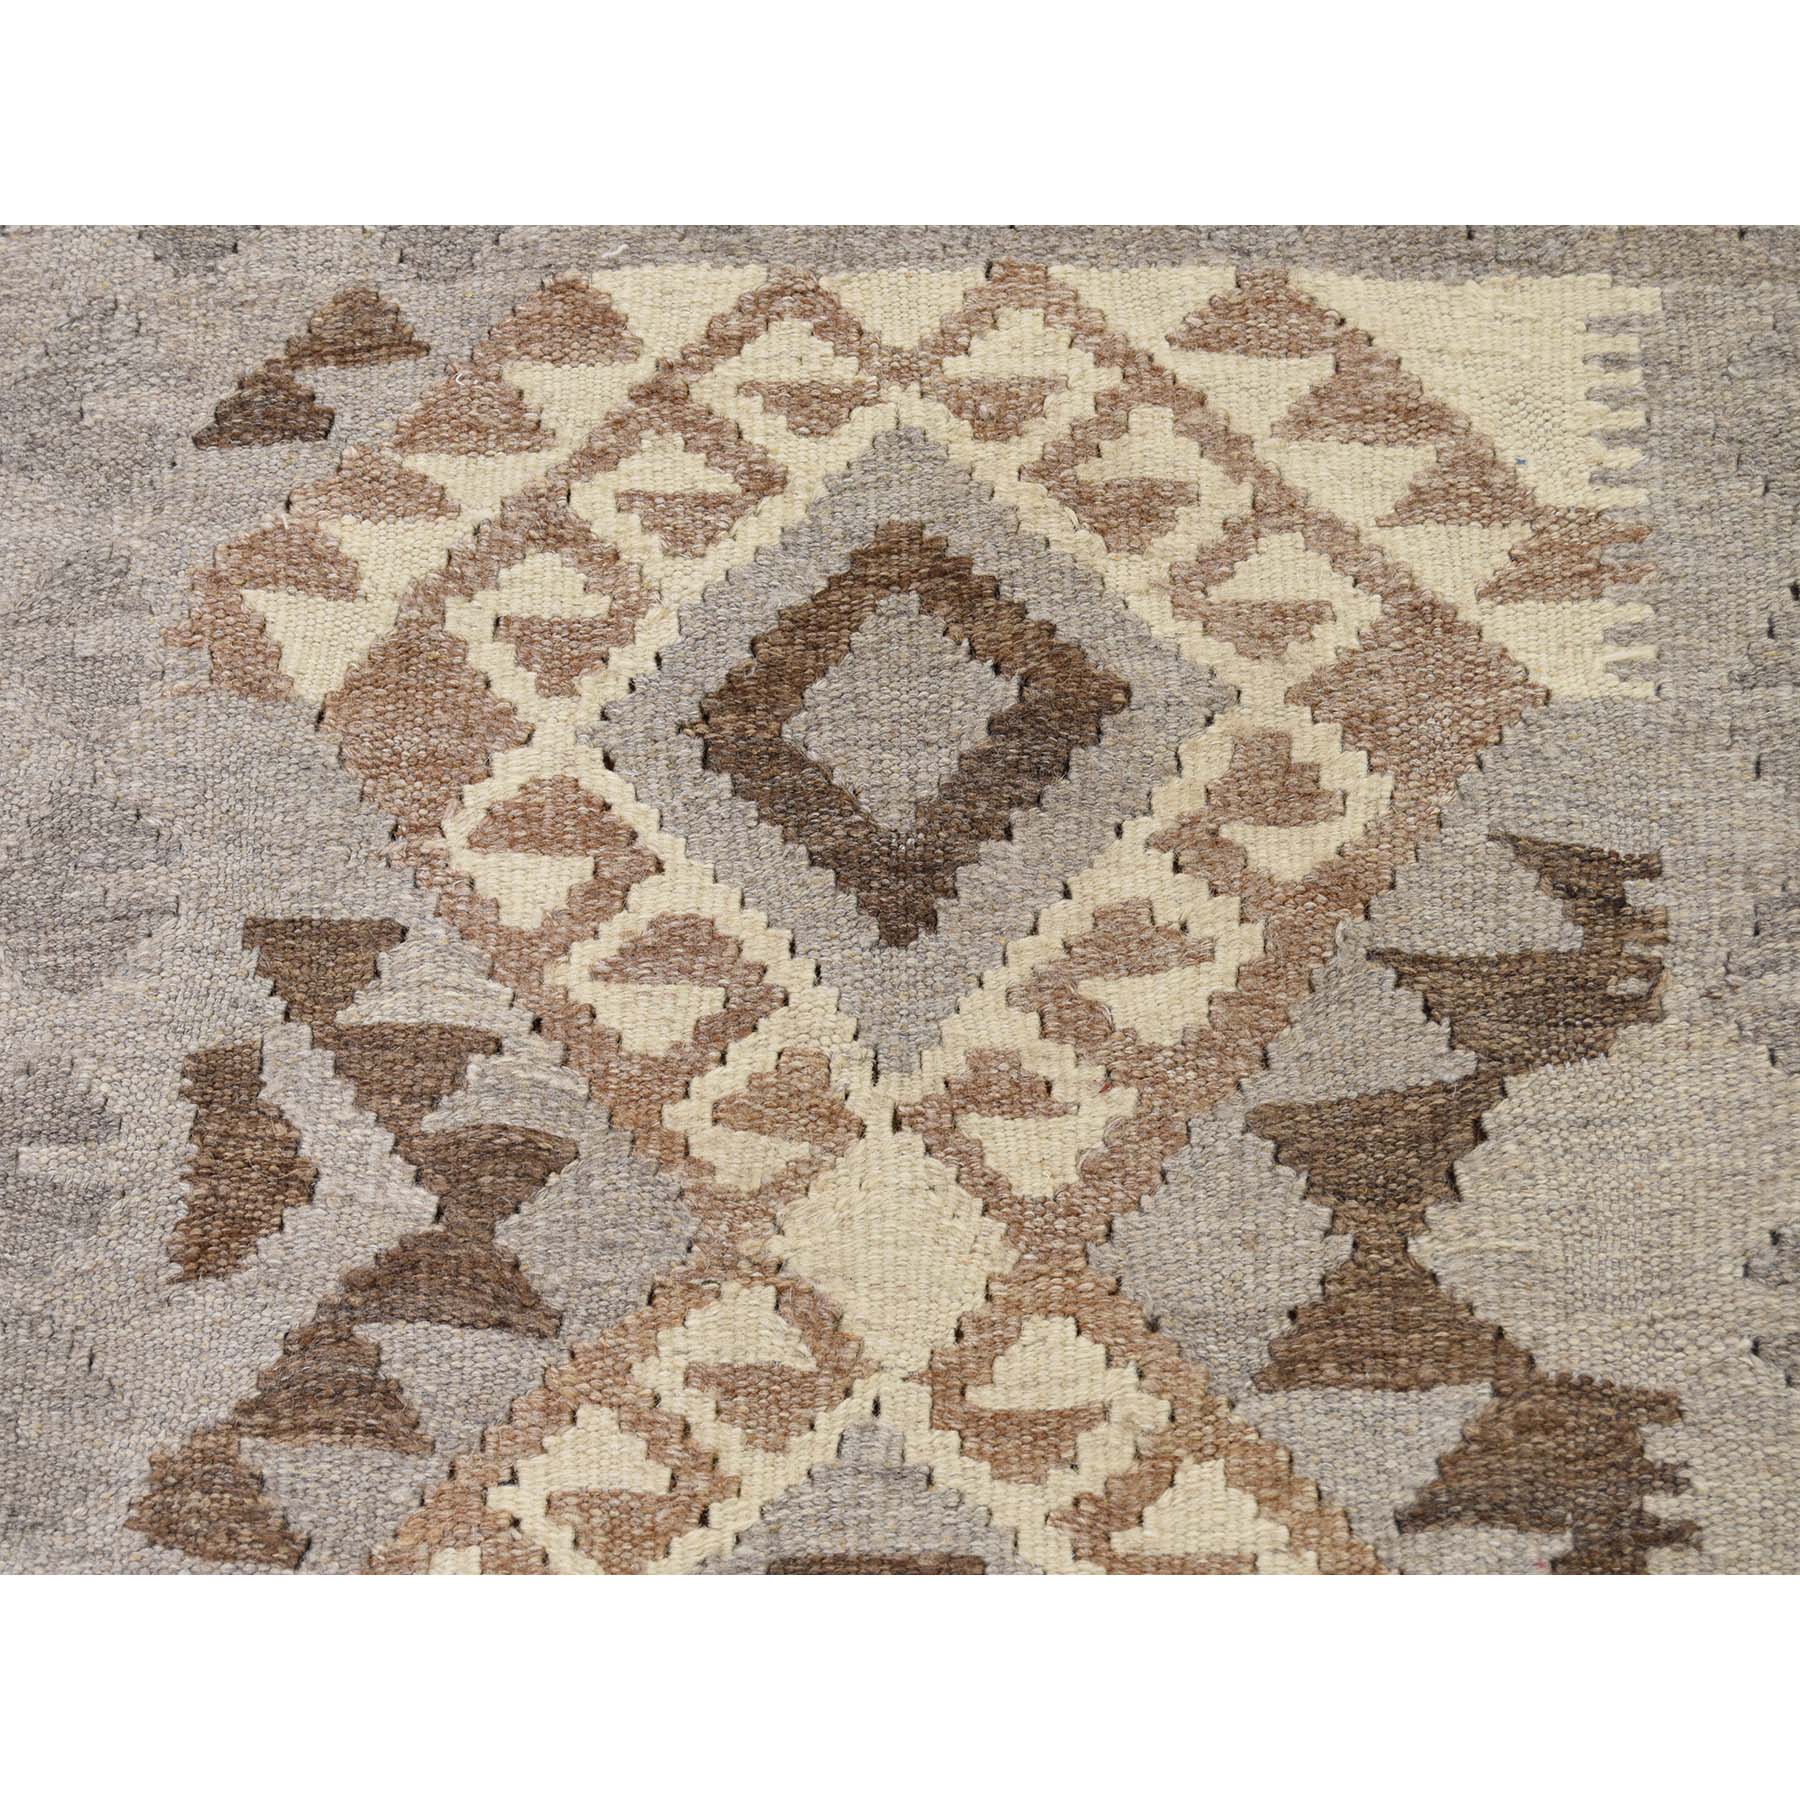 2-8 x4- Afghan Kilim Reversible Undyed Natural Wool Hand Woven Oriental Rug 